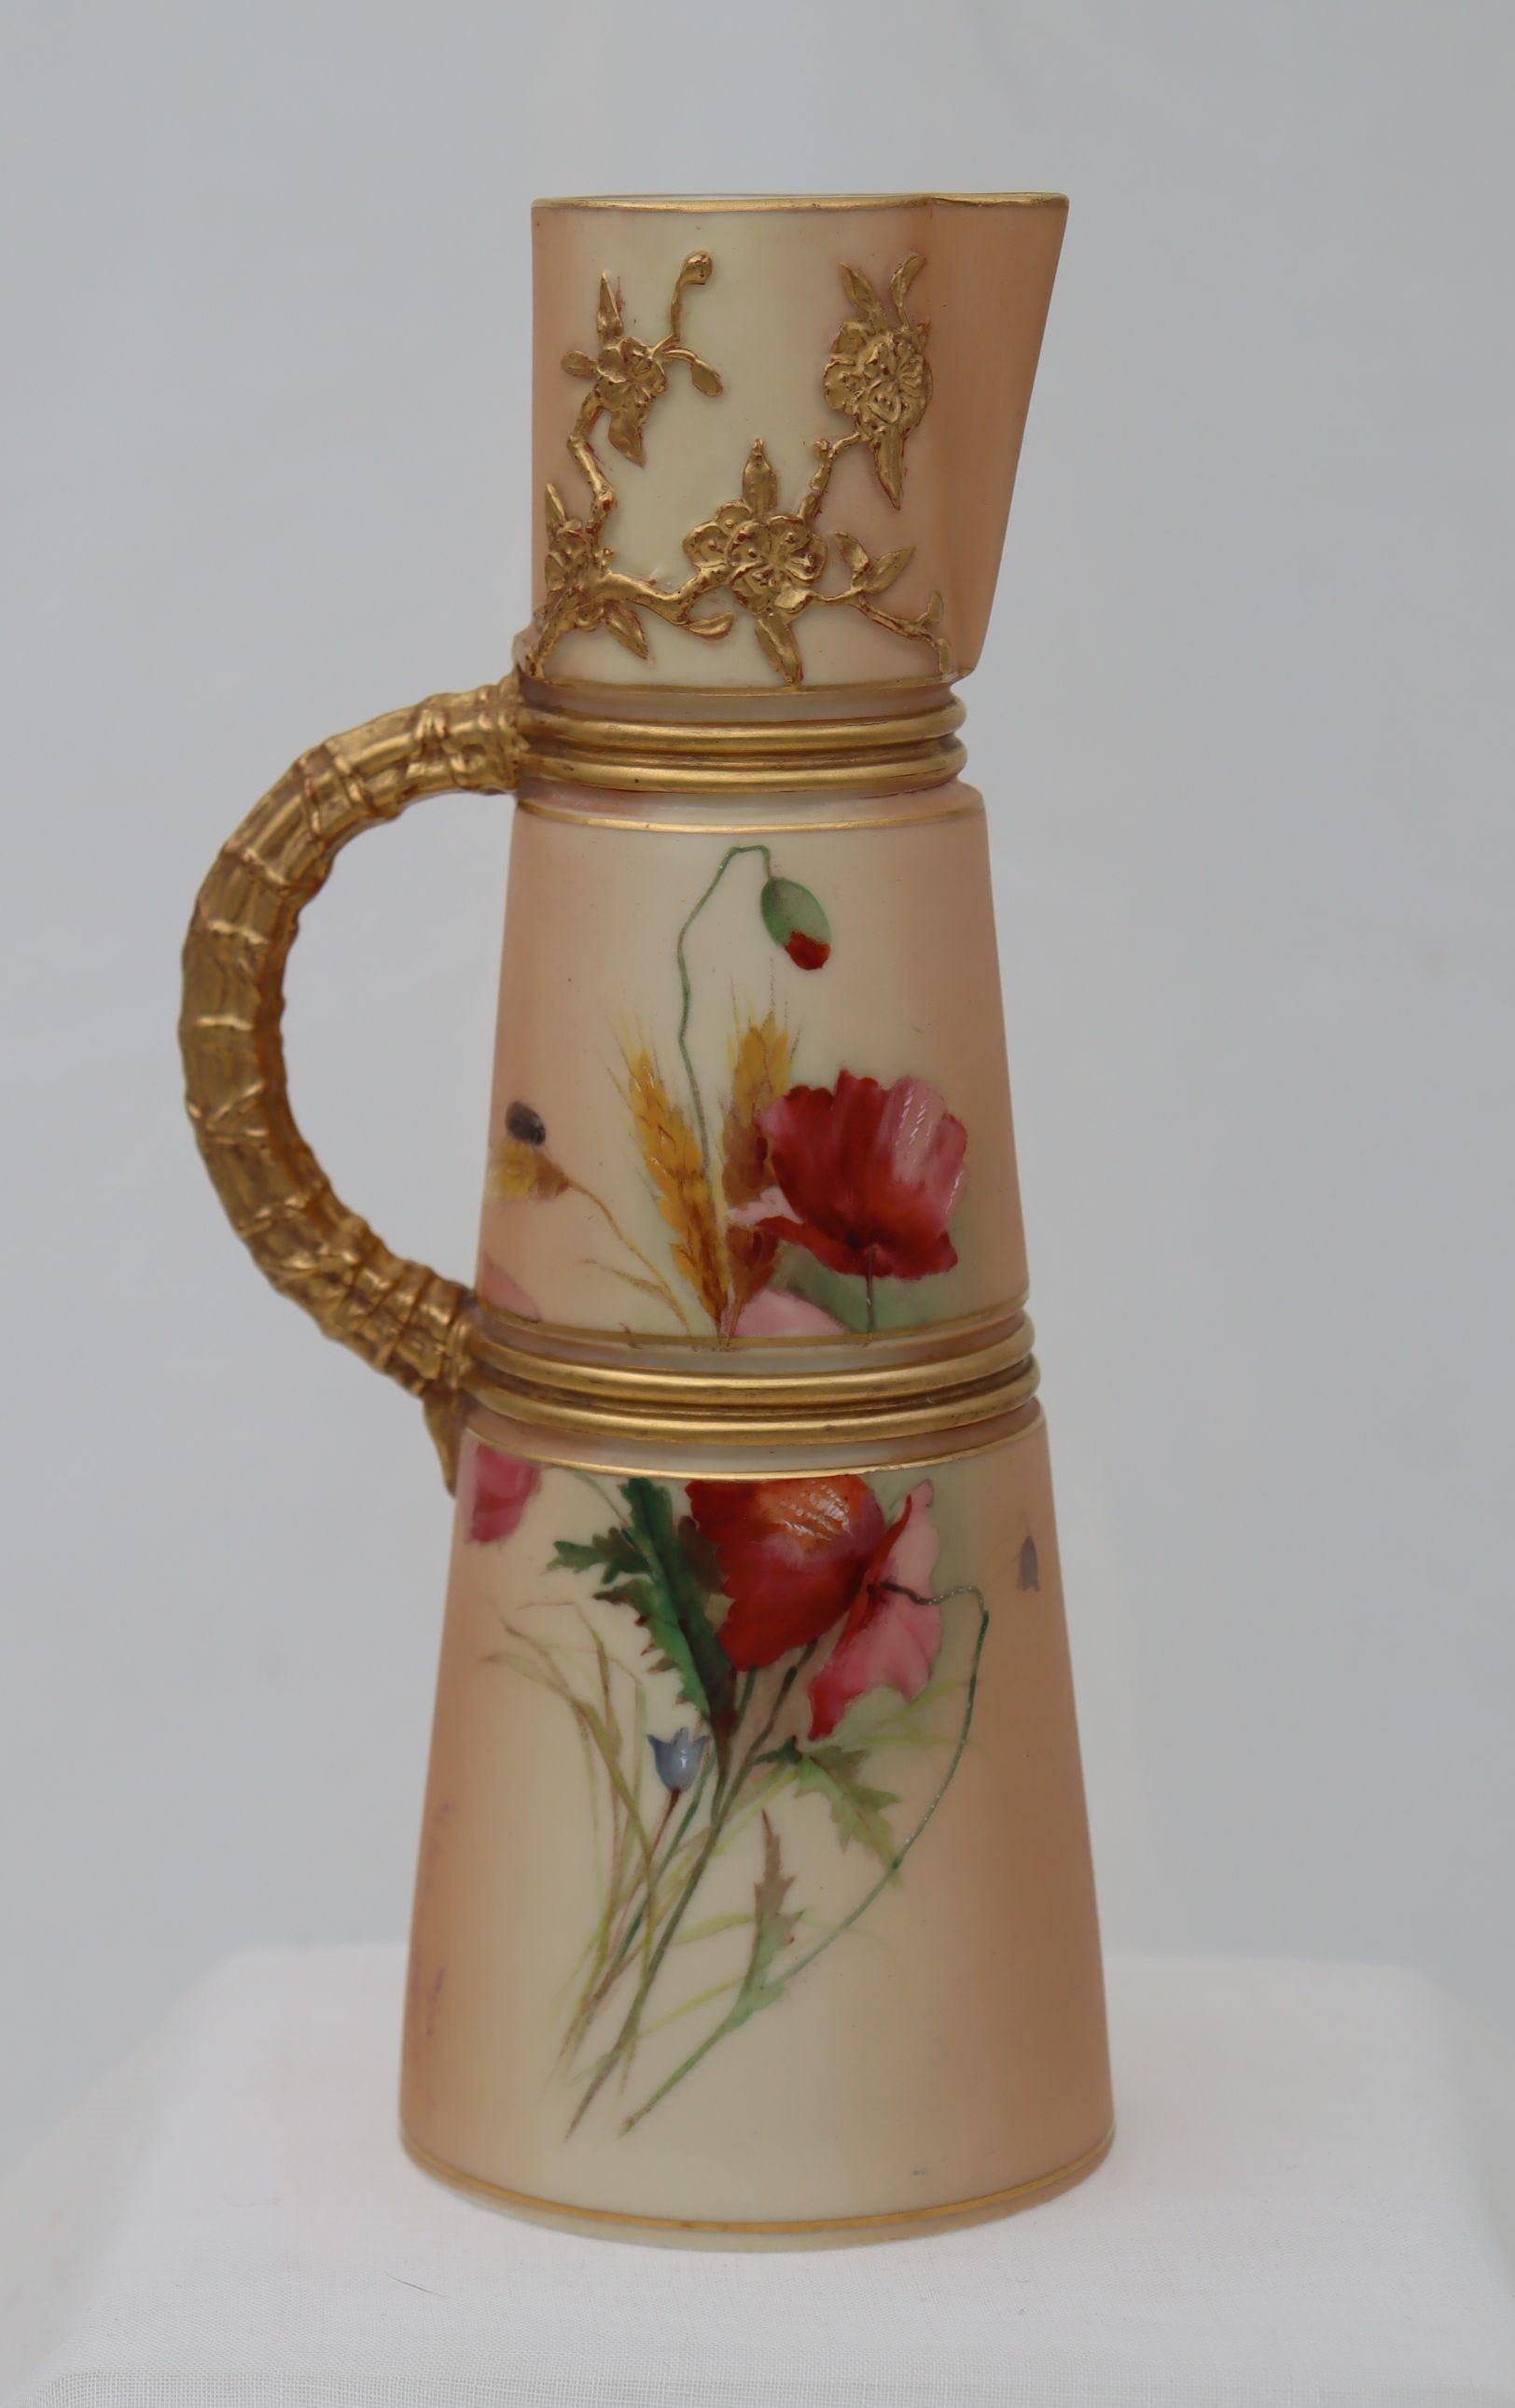 Royal Worcester offered four sizes of this claret jug shape, the shape being number 1047, which was first issued in 1884. This one stands 224 mm (8.75 inches) high and measures 83 mm (3.25 inches) across the base.  This example is decorated to the